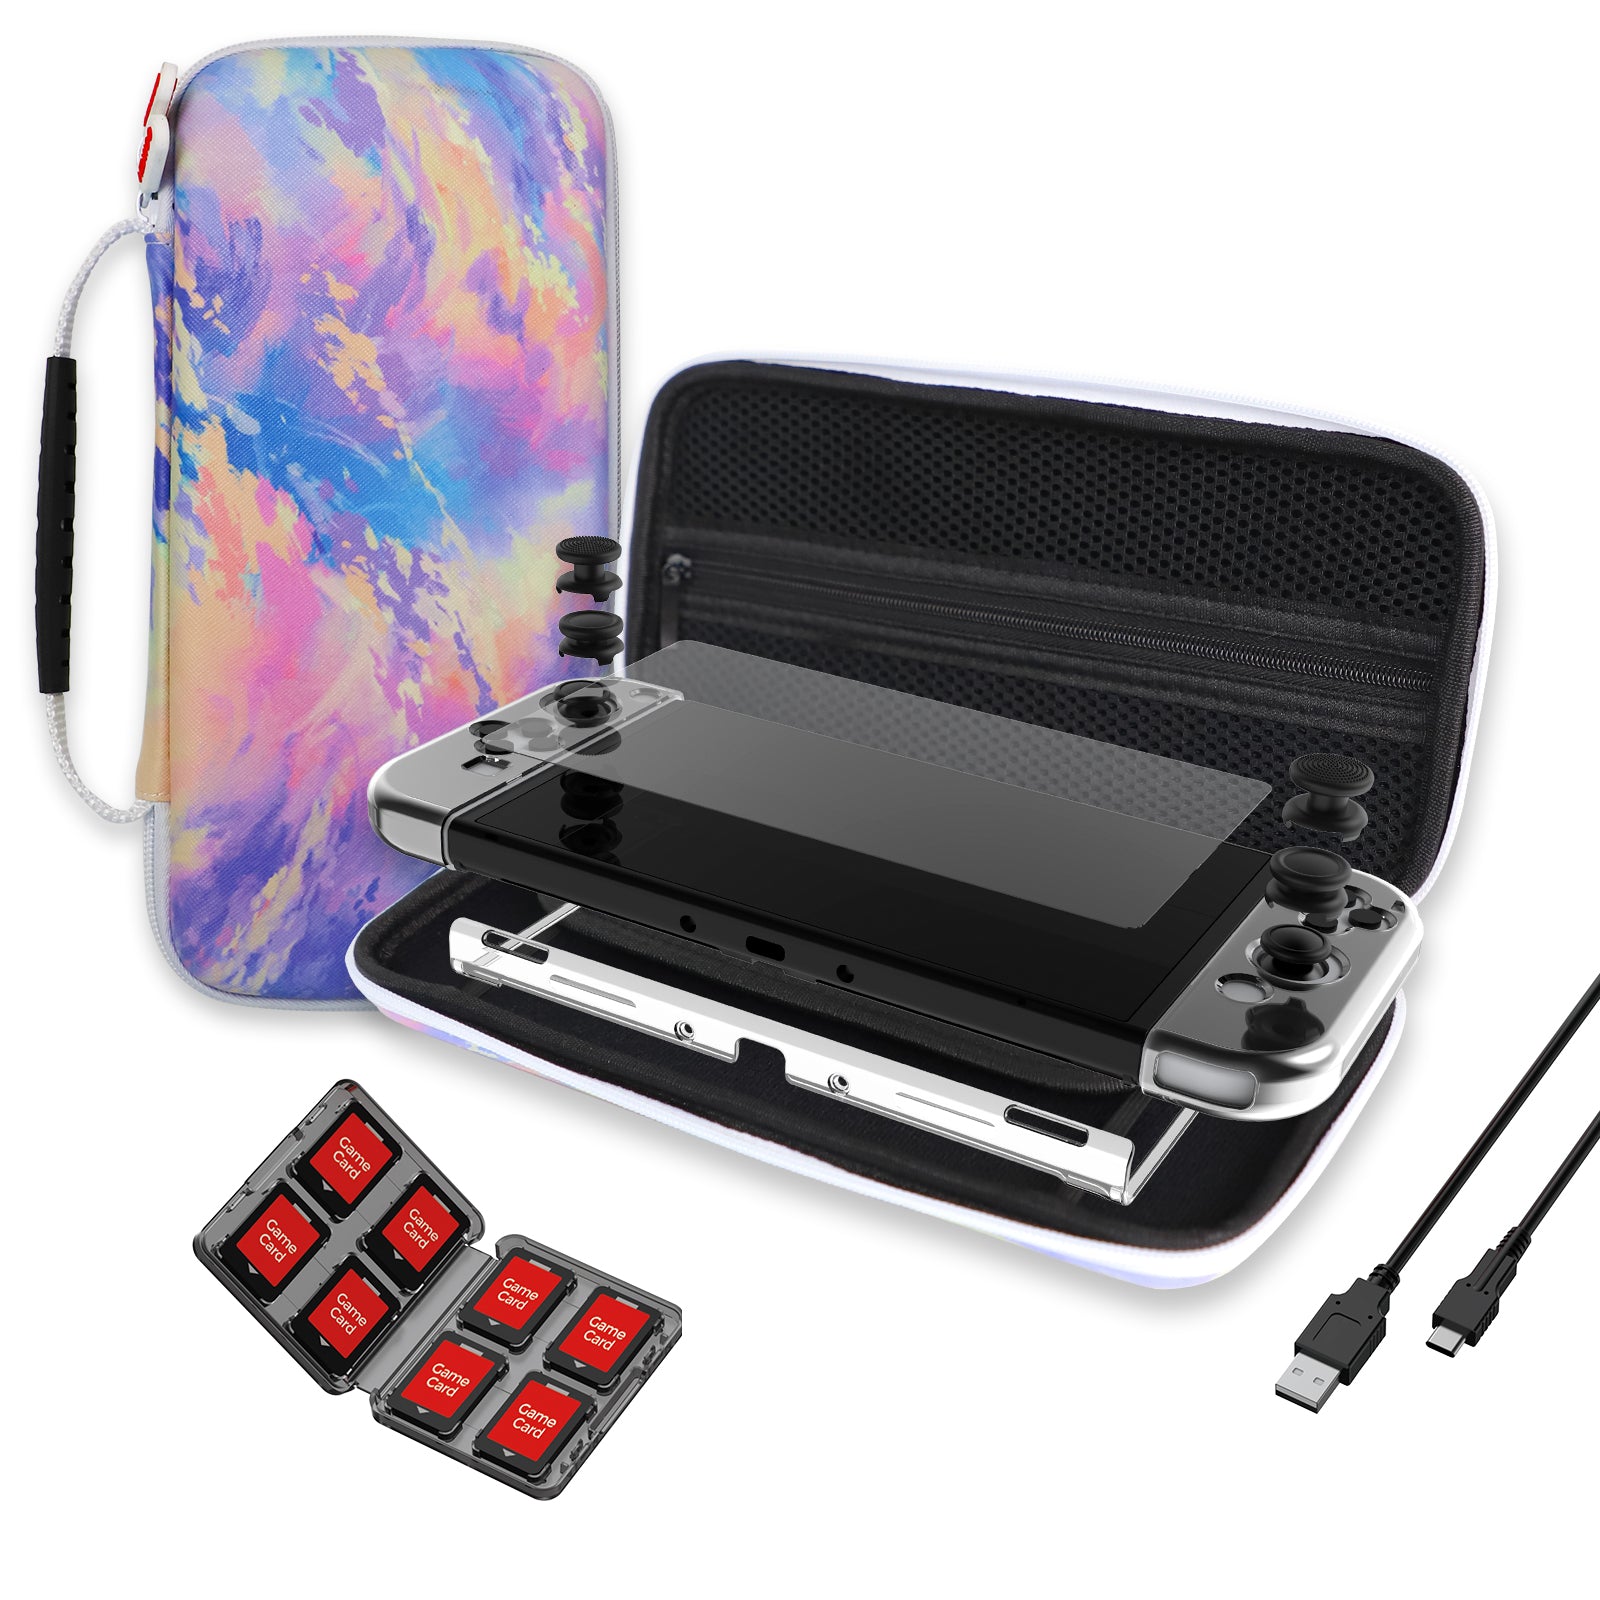 Sunset Carry Case for Switch OLED with screen protector, charging cable, Thumbstick Caps.